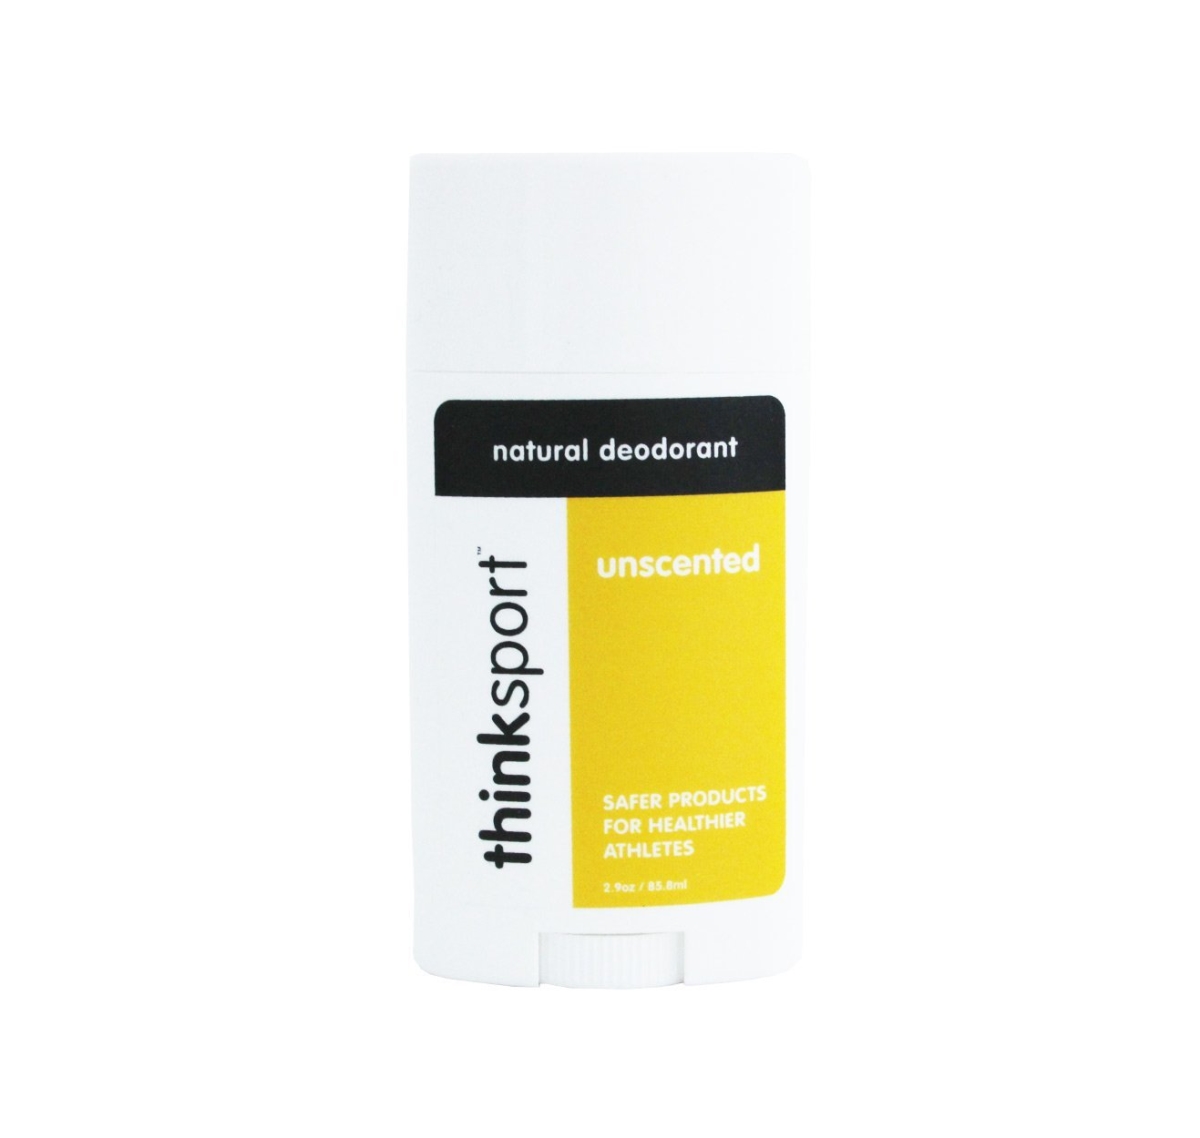 Tnk-07642 Thinksport Deodorant Unscented, Yellow & White And Black - 2.90 Oz.